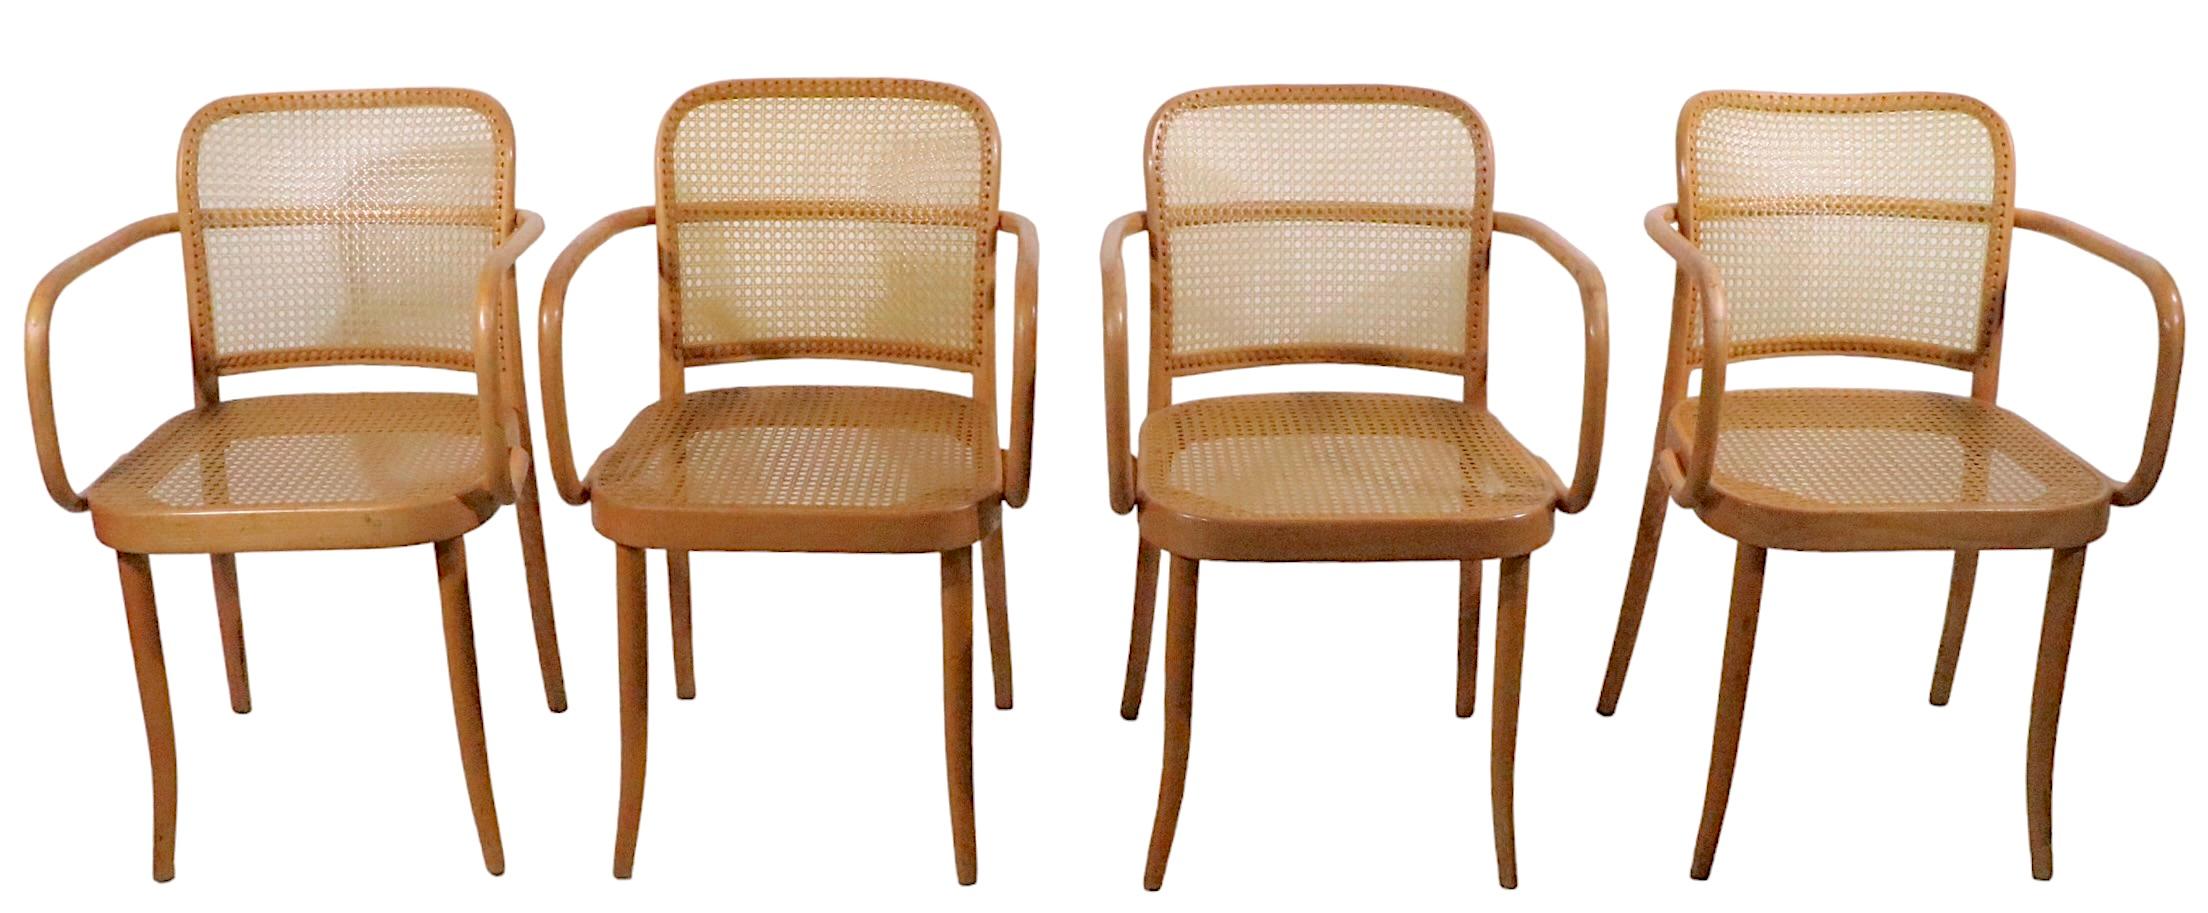 Set of 5 Josef Frank Prague Chairs Made in Czechoslovakia, circa 1970s In Good Condition For Sale In New York, NY